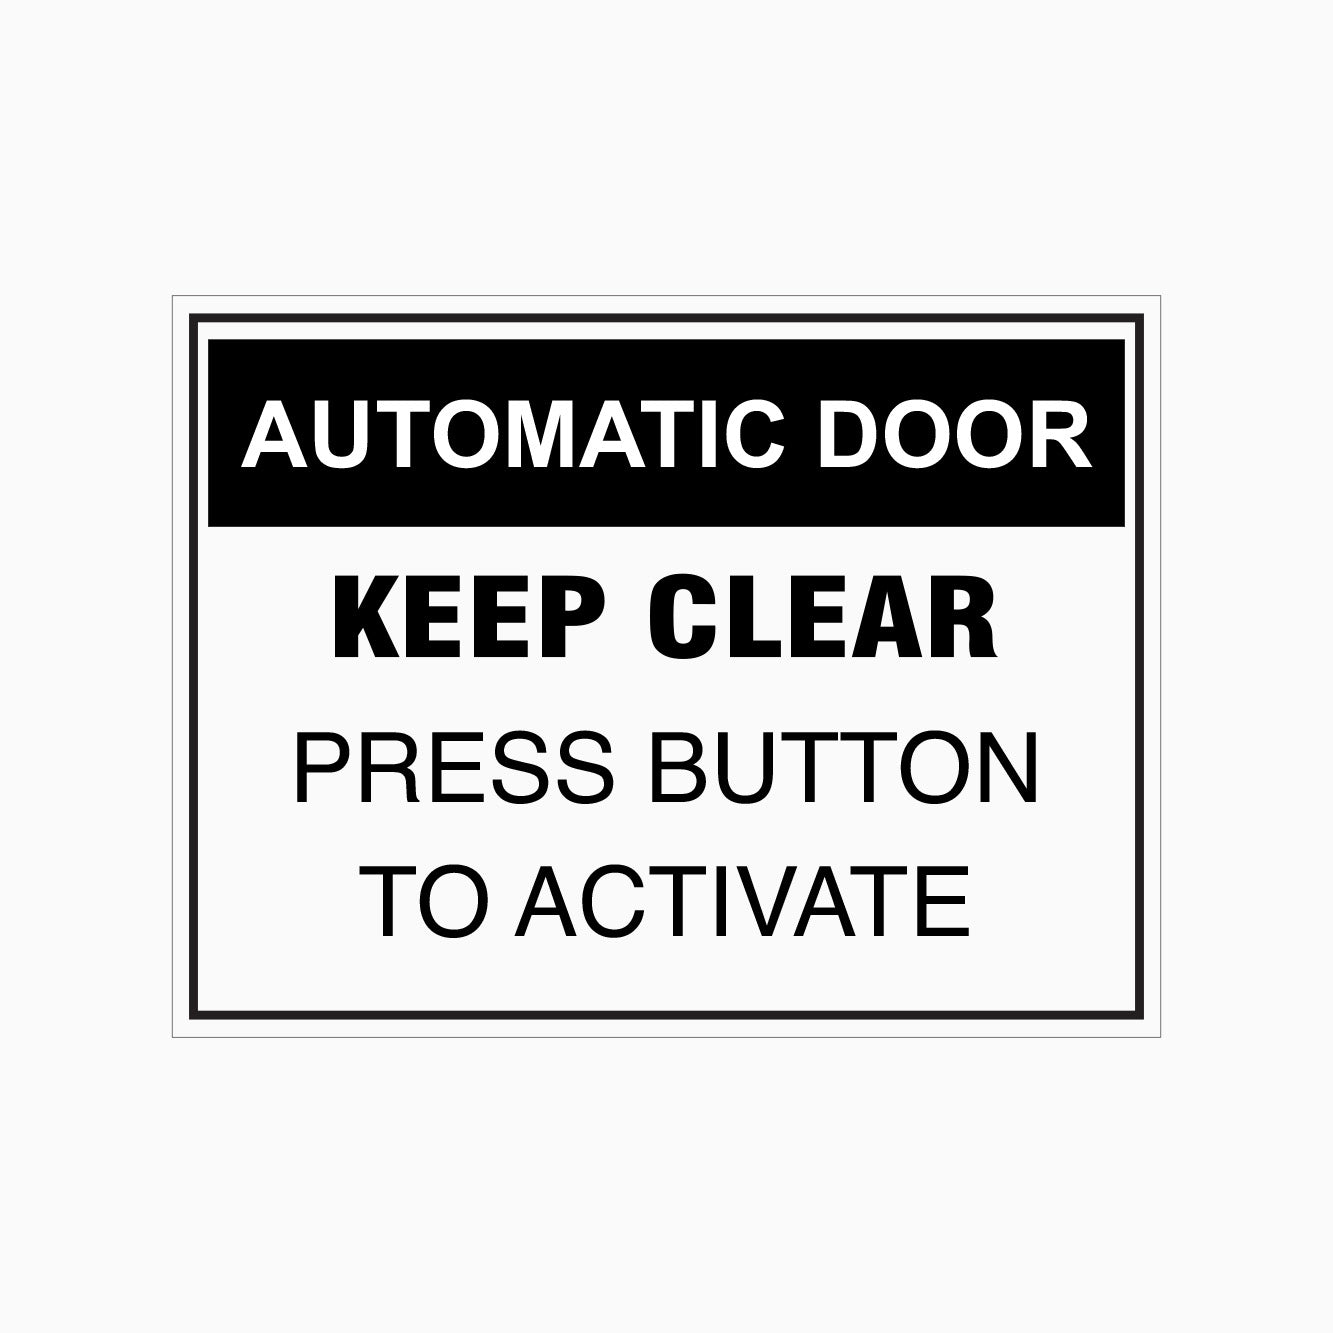 AUTOMATIC DOOR - KEEP CLEAR - PRESS BUTTON TO ACTIVATE SIGN